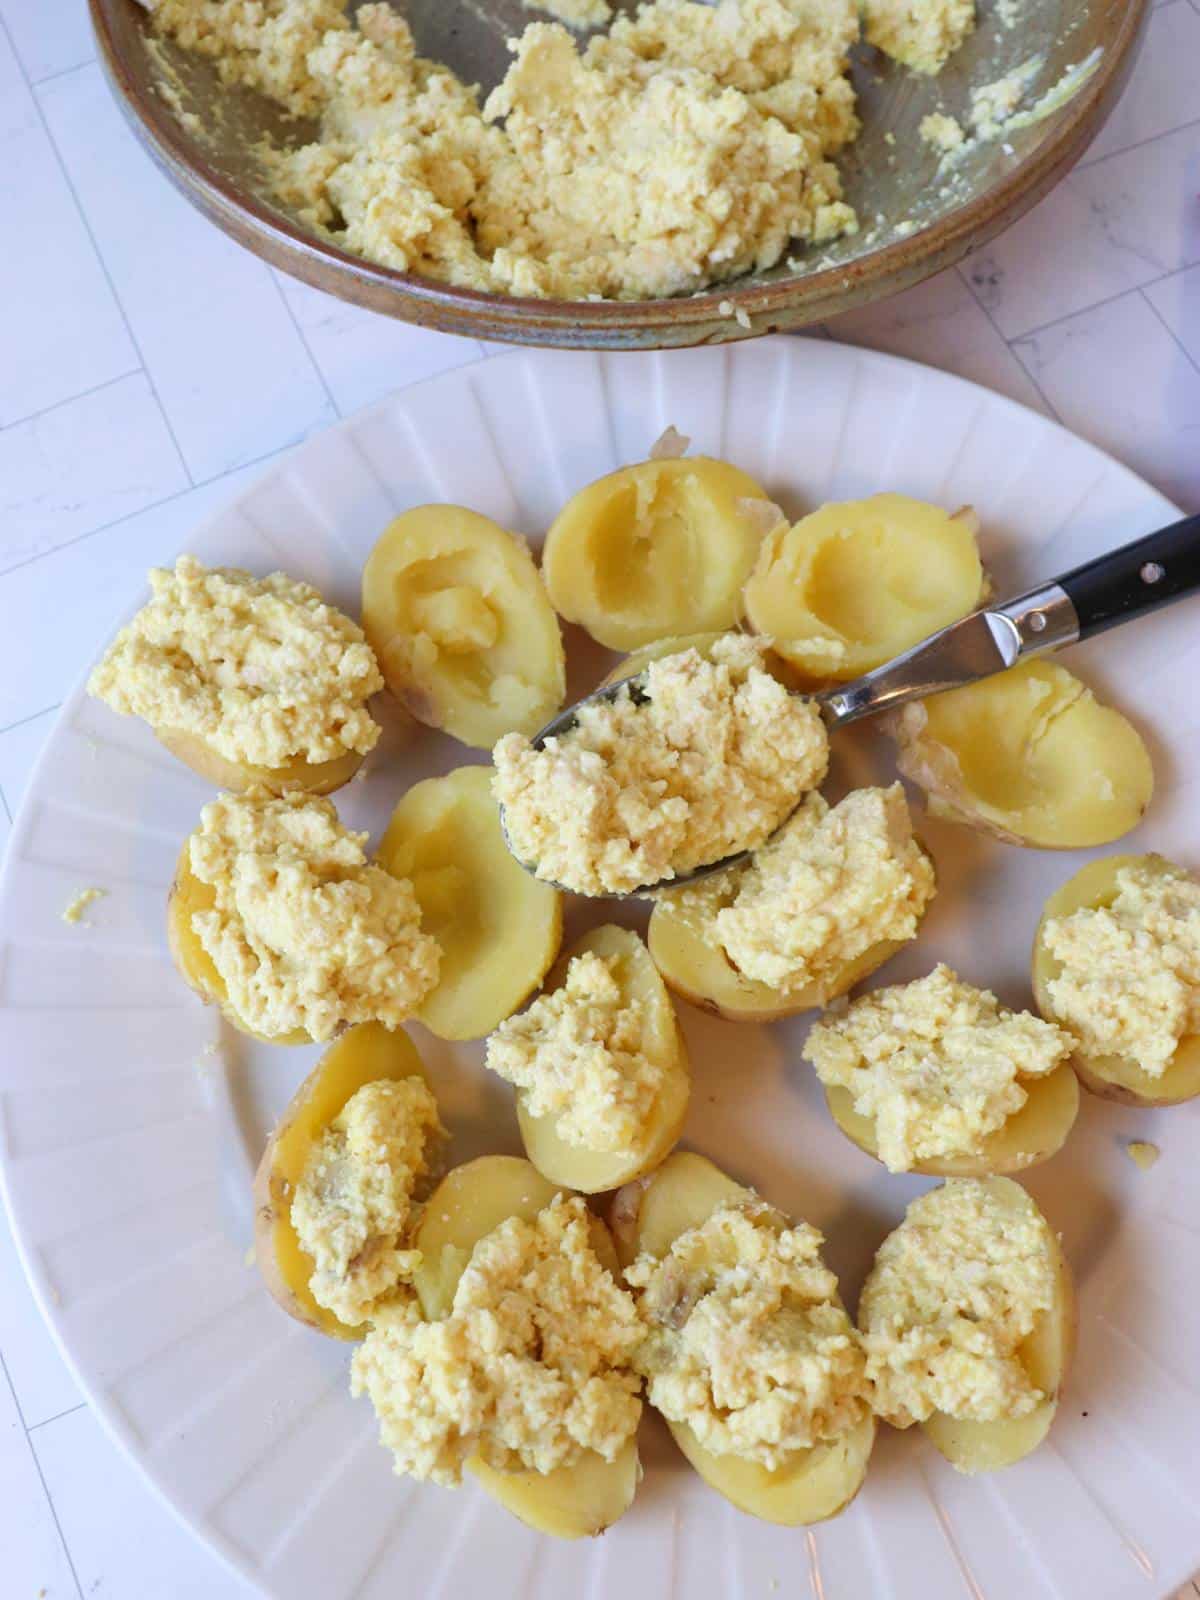 Small boiled potatoes being filled with vegan deviled egg filling.